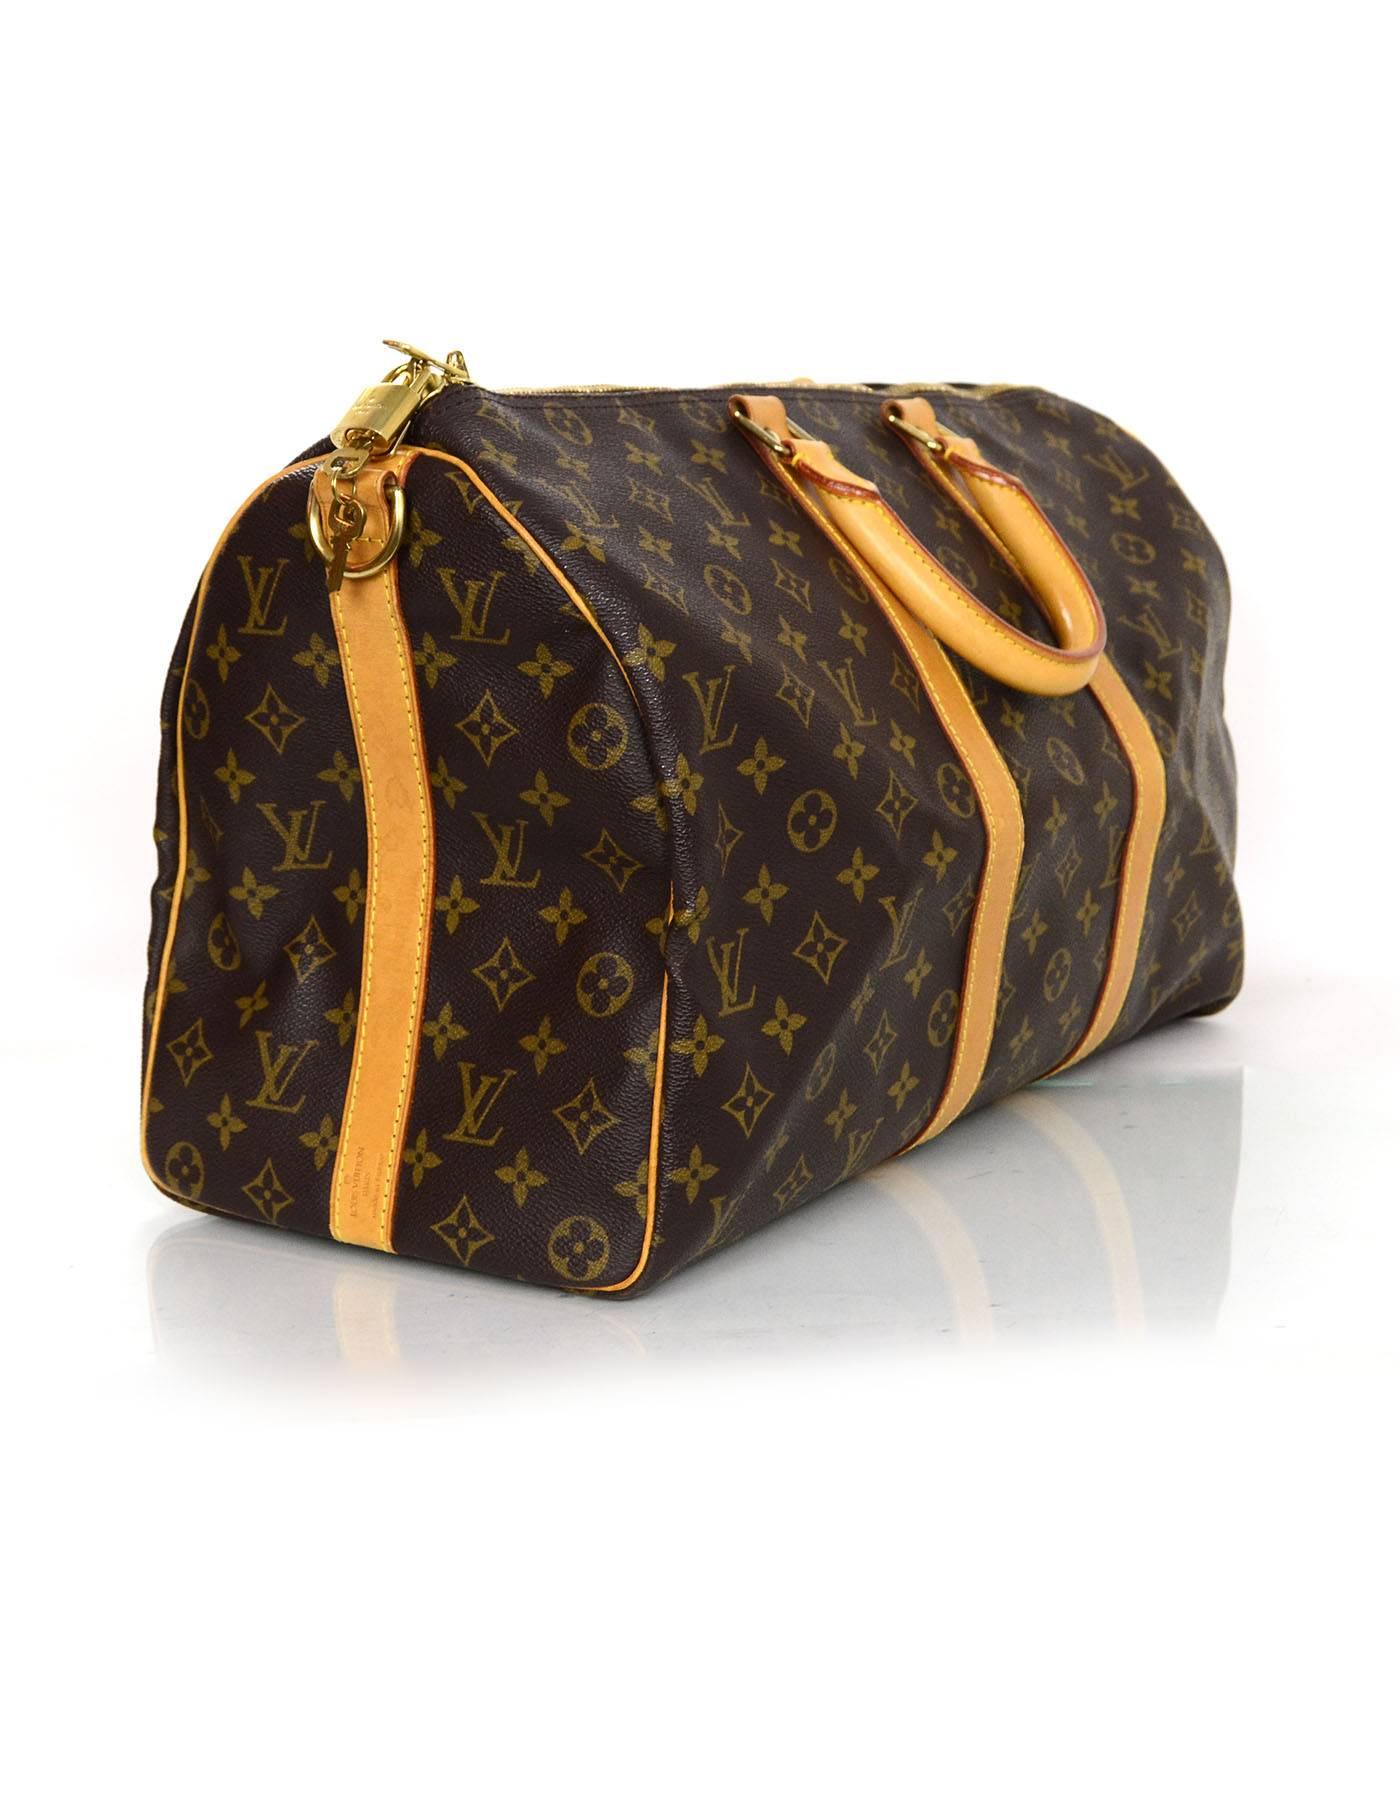 Louis Vuitton Monogram Keepall Bandouliere 45 

Made In: France
Year of Production: 1996
Color: Brown and tan
Hardware: Goldtone
Materials: Coated canvas and leather
Lining: Brown canvas
Closure/Opening: zip across top
Exterior pockets: